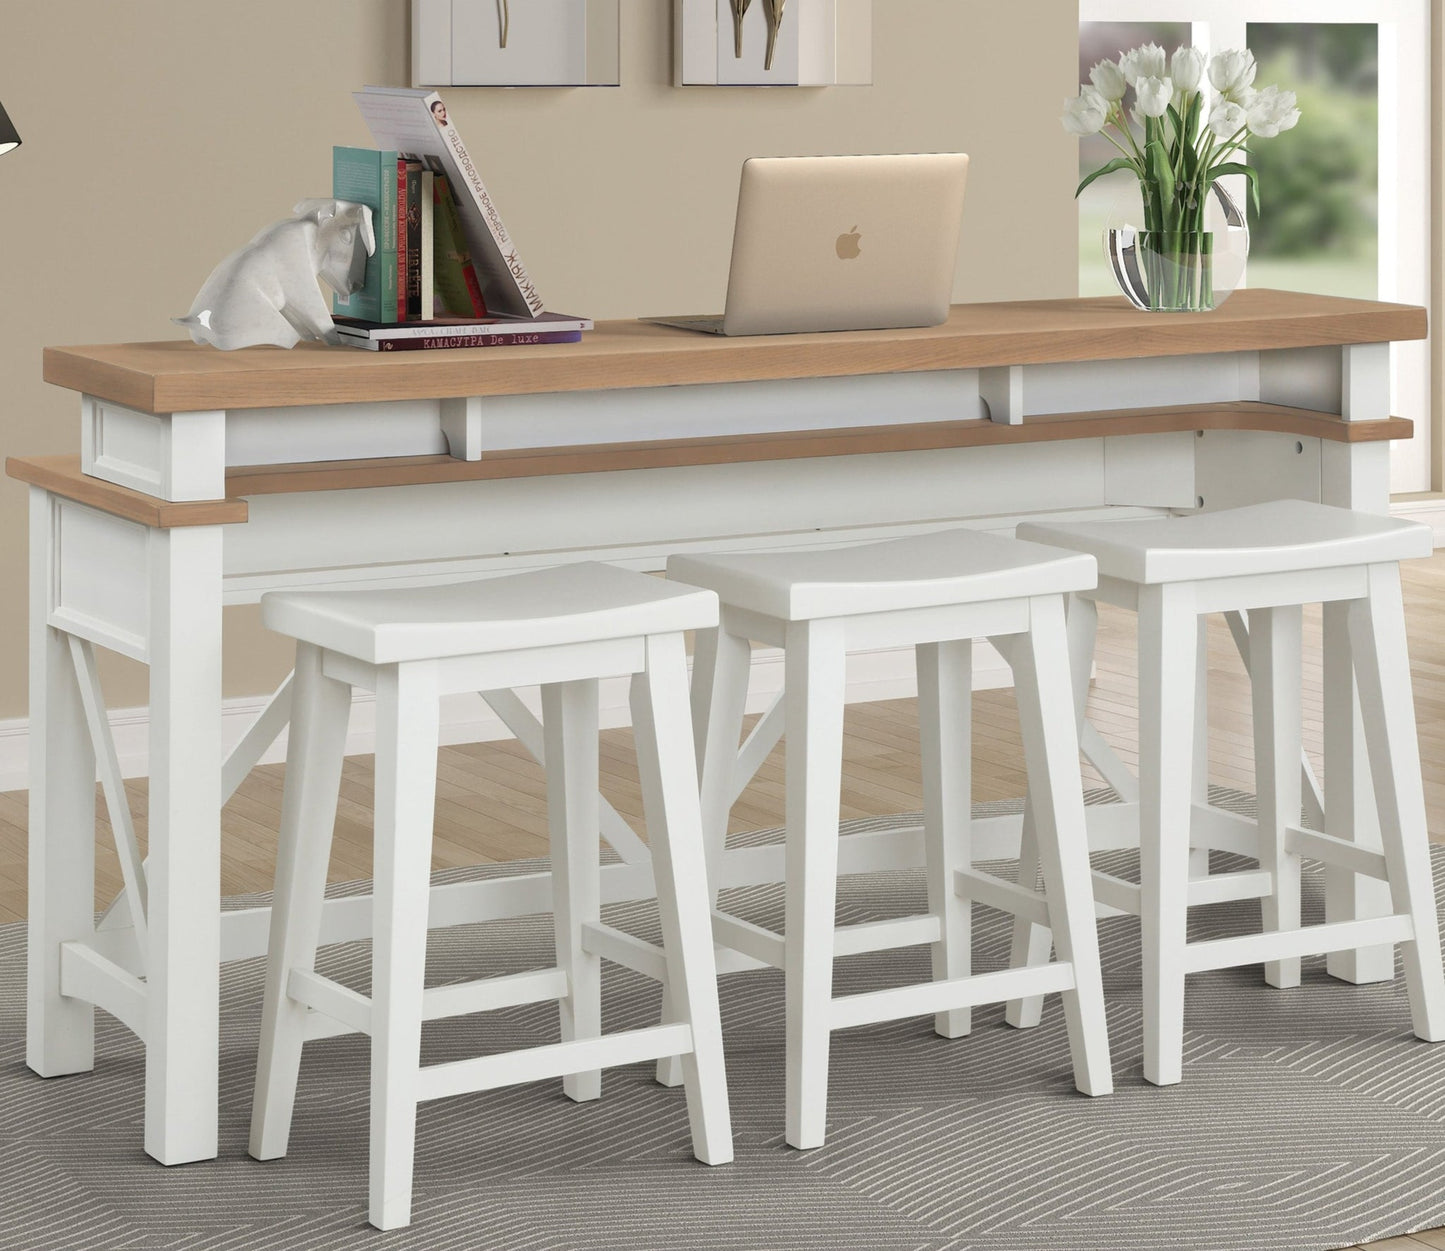 AMERICANA MODERN - COTTON EVERYWHERE CONSOLE WITH 3 STOOLS